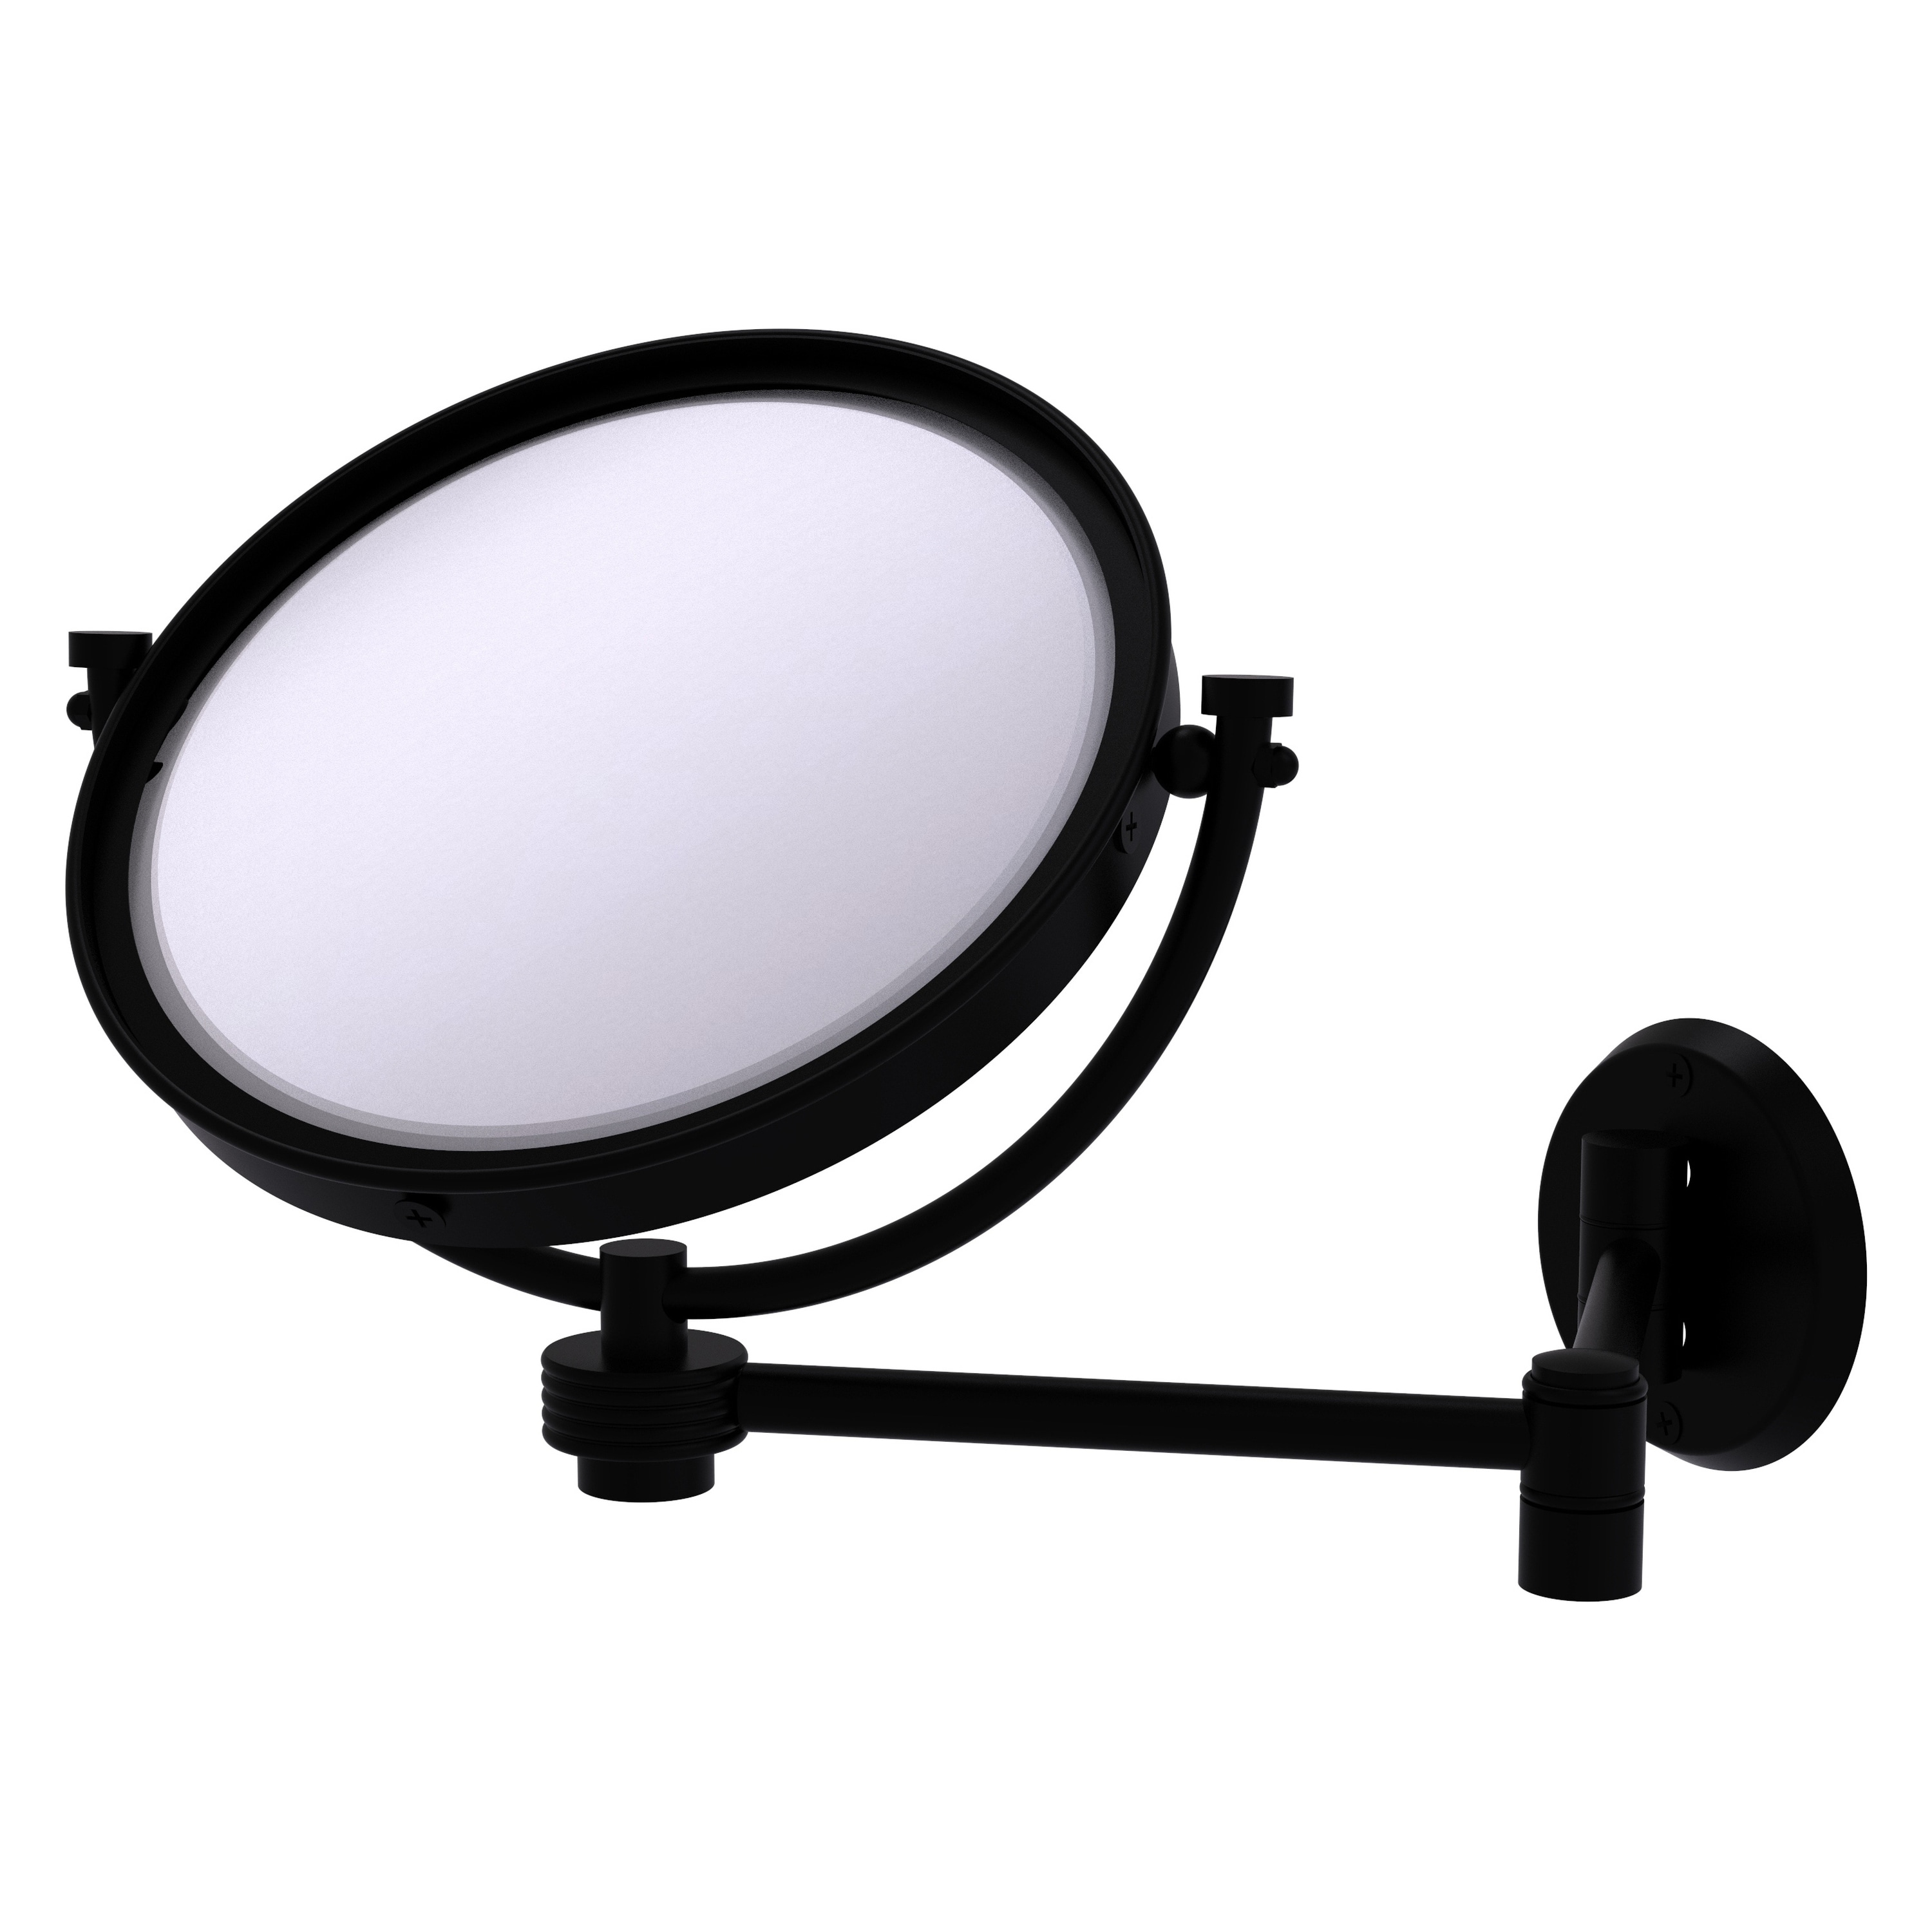 8-in x 10-in Matte Gray Double-sided 3X Magnifying Wall-mounted Vanity Mirror | - Allied Brass WM-6G/3X-BKM